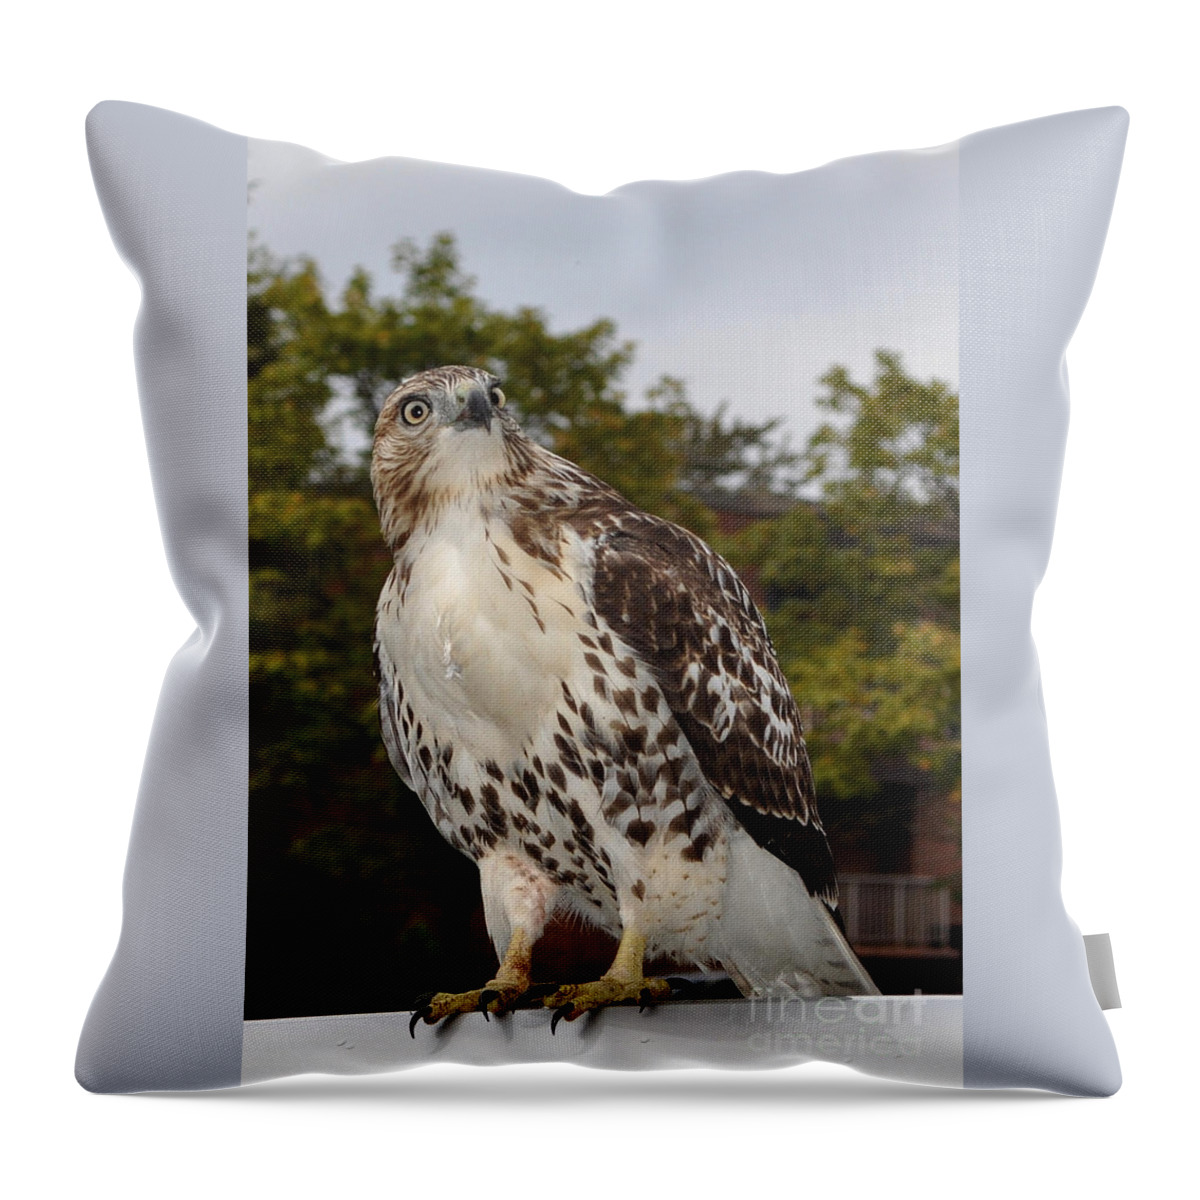 Hawk Throw Pillow featuring the photograph Hawk by Luke Moore